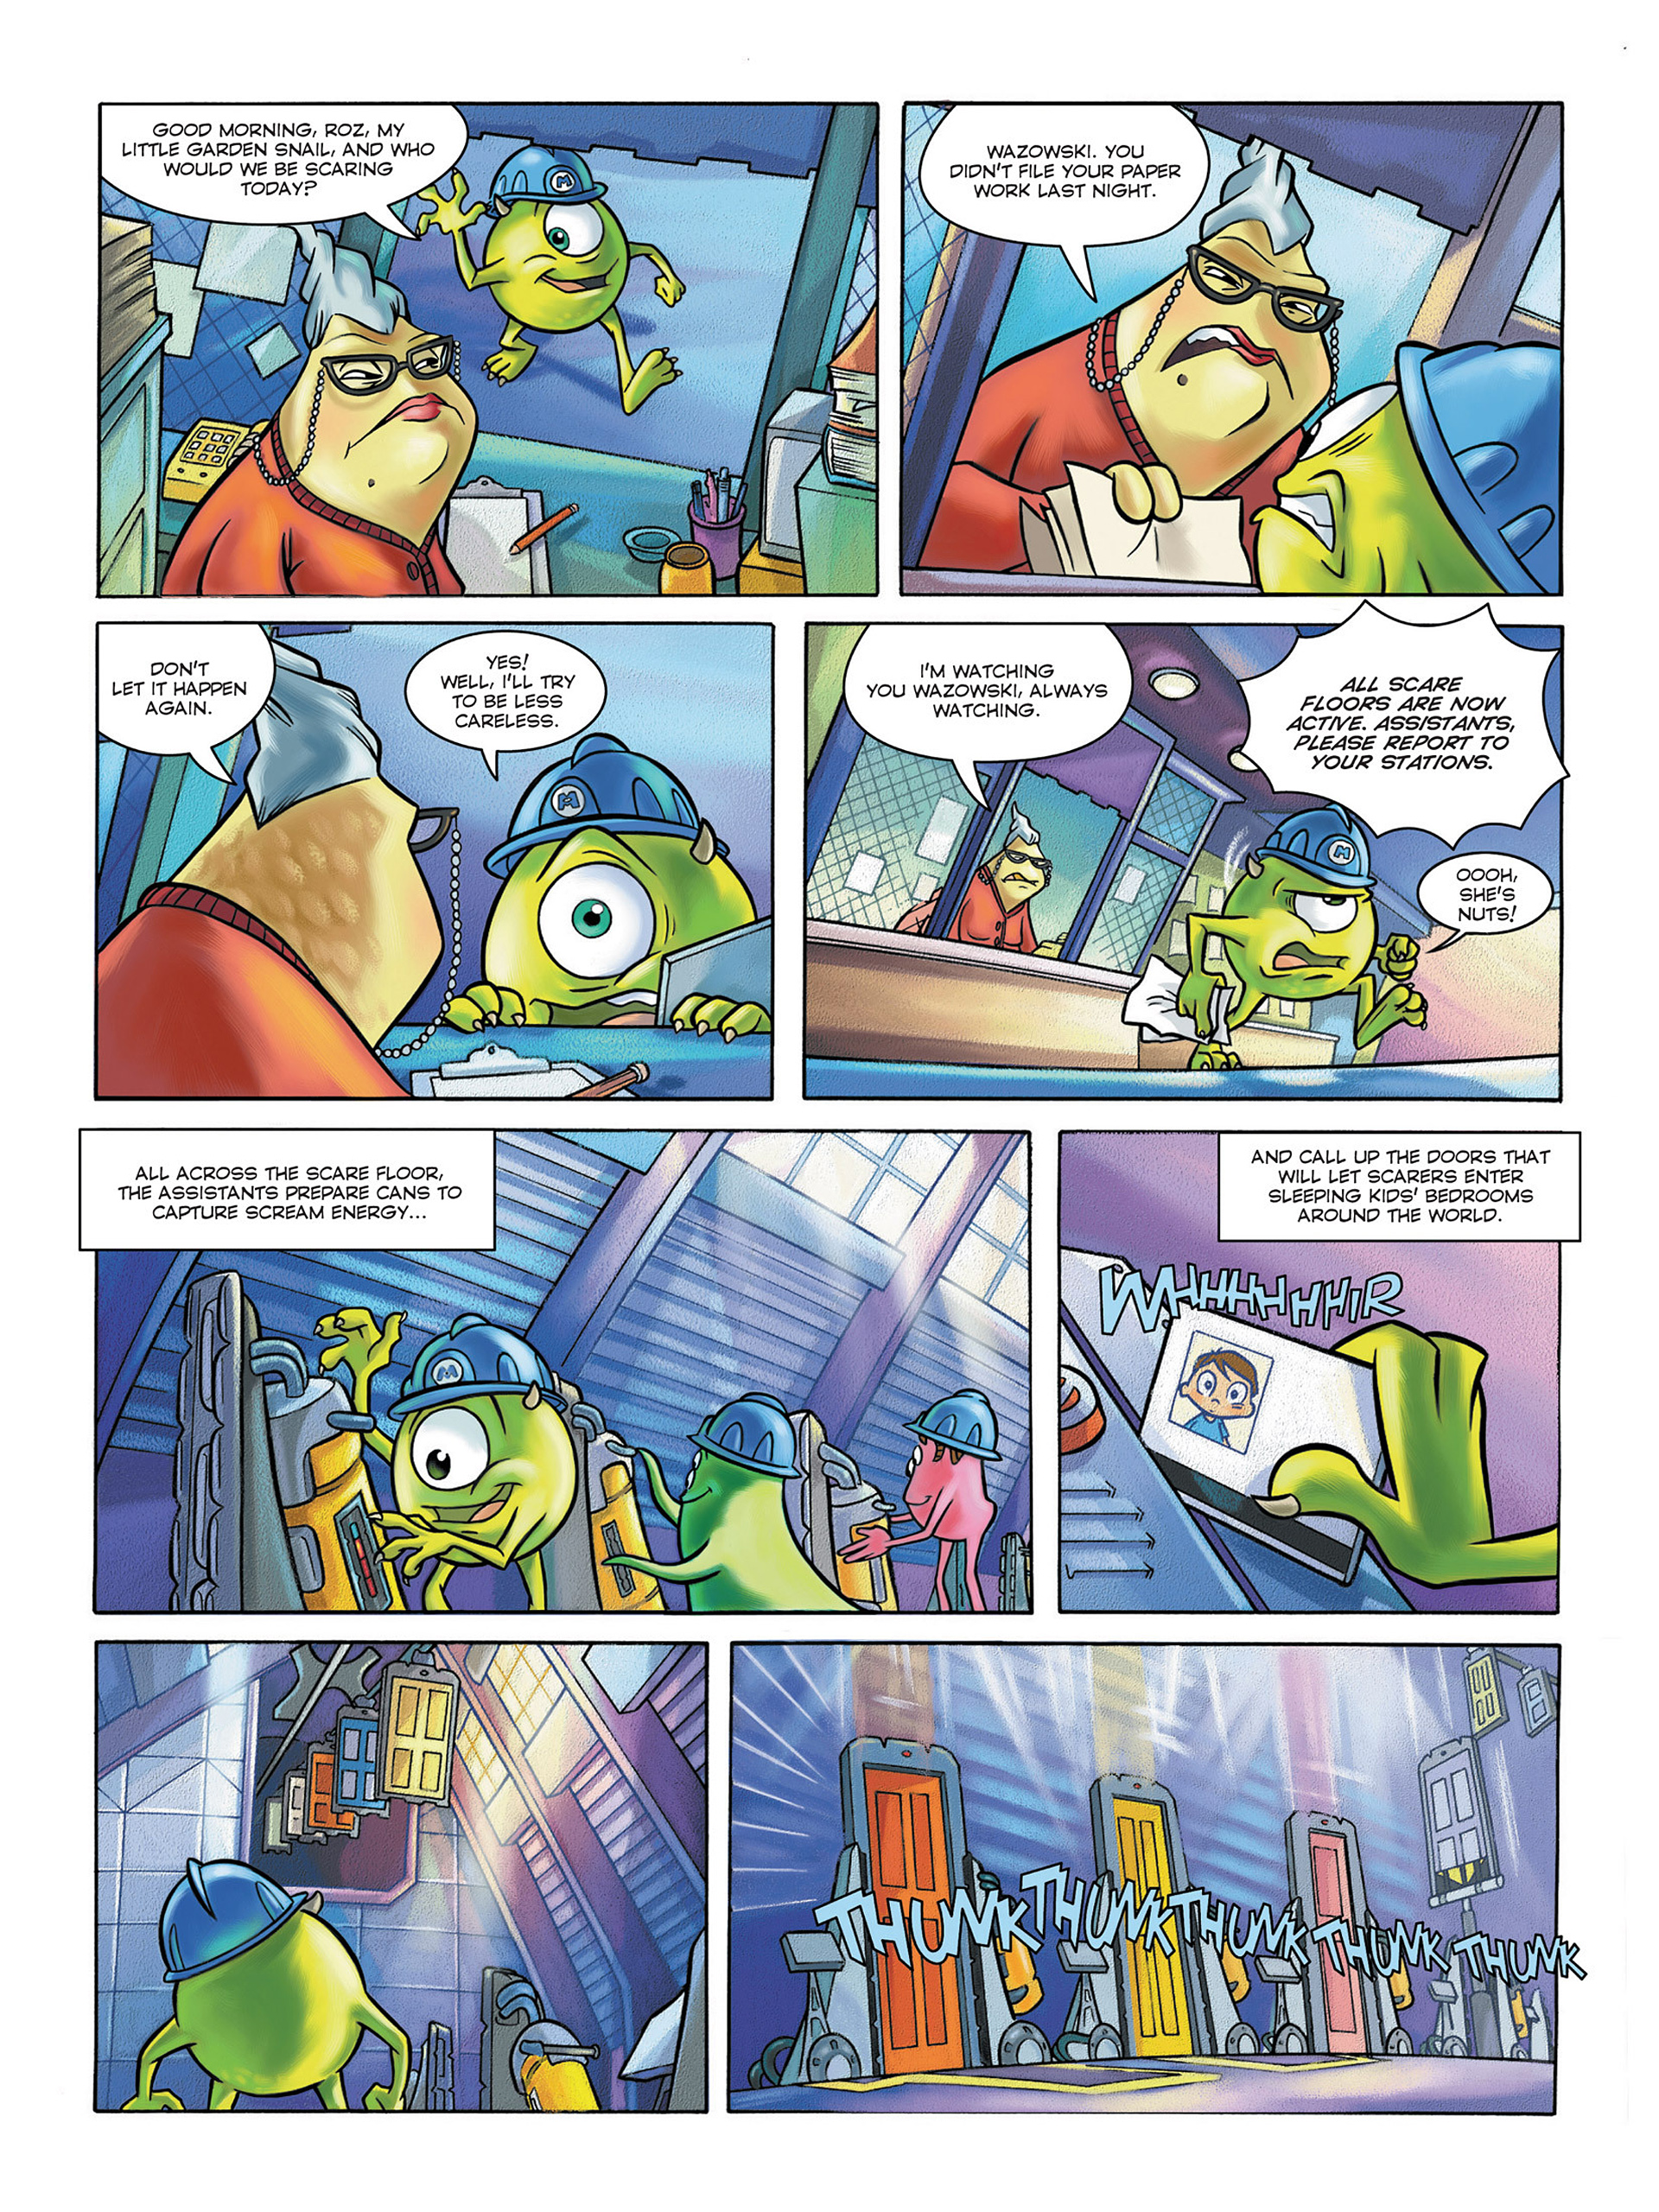 Read online Monsters, Inc. comic -  Issue # Full - 8